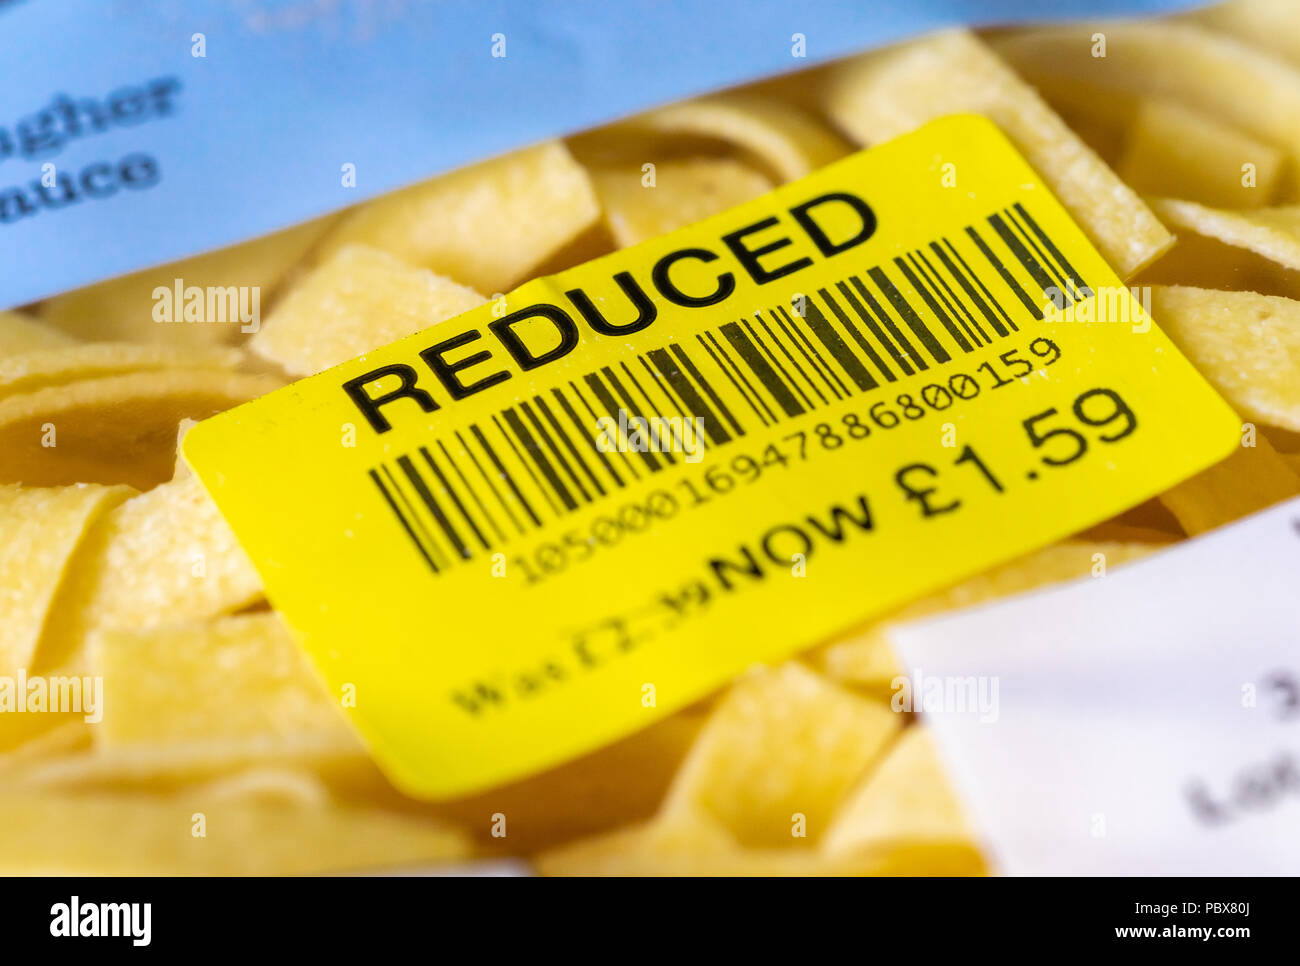 9 Ways to Reduce Food Cost Without Giving in on Quality